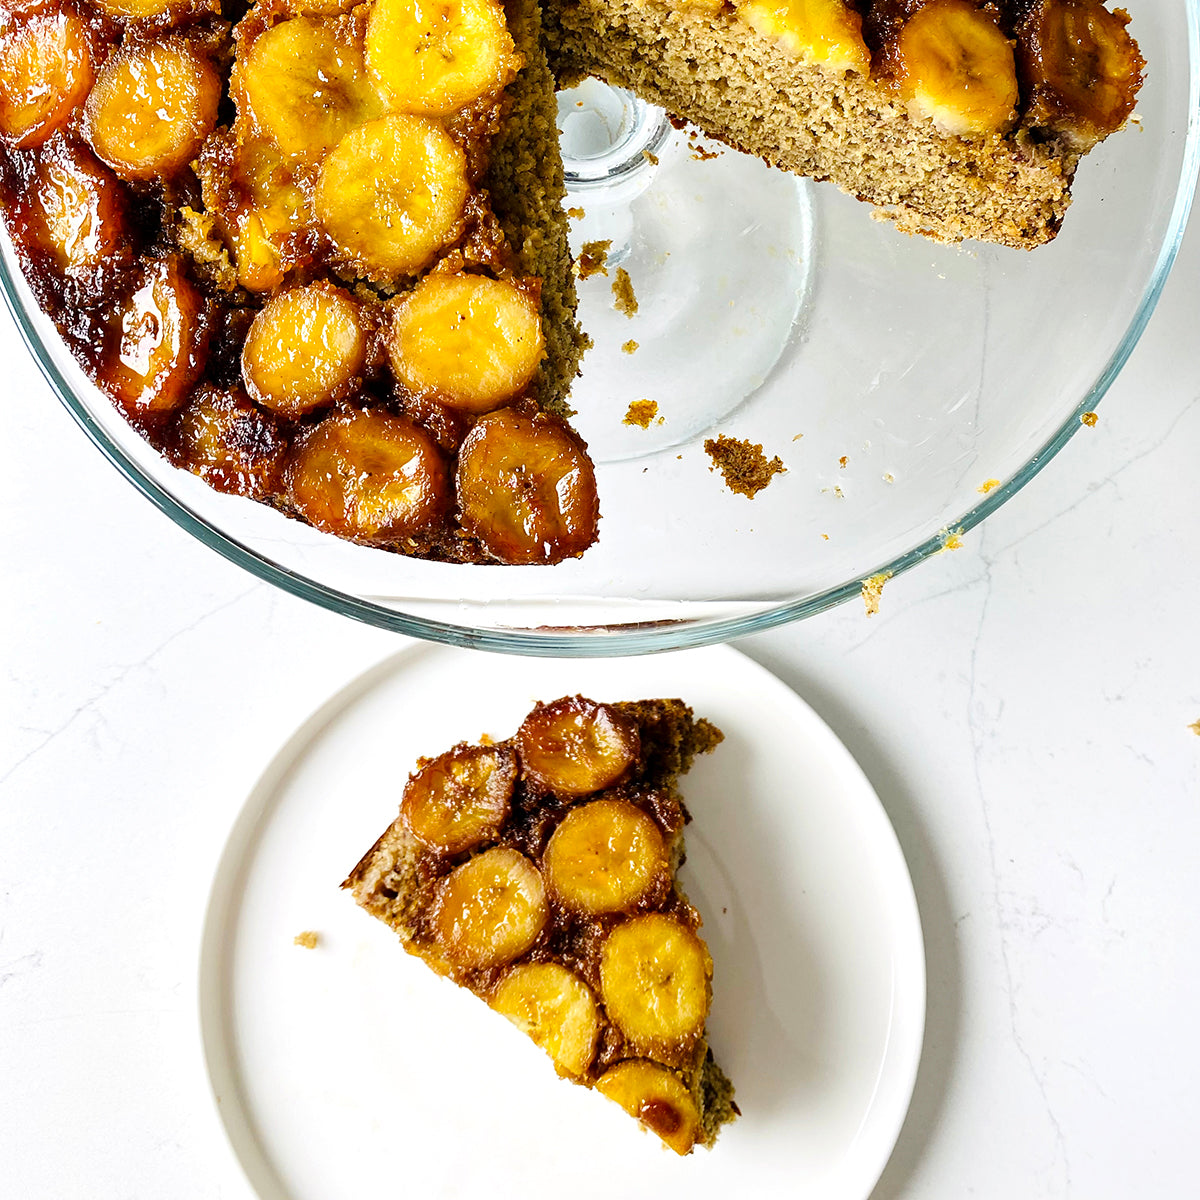 Gluten Free Banana Upside Down Cake without Nuts